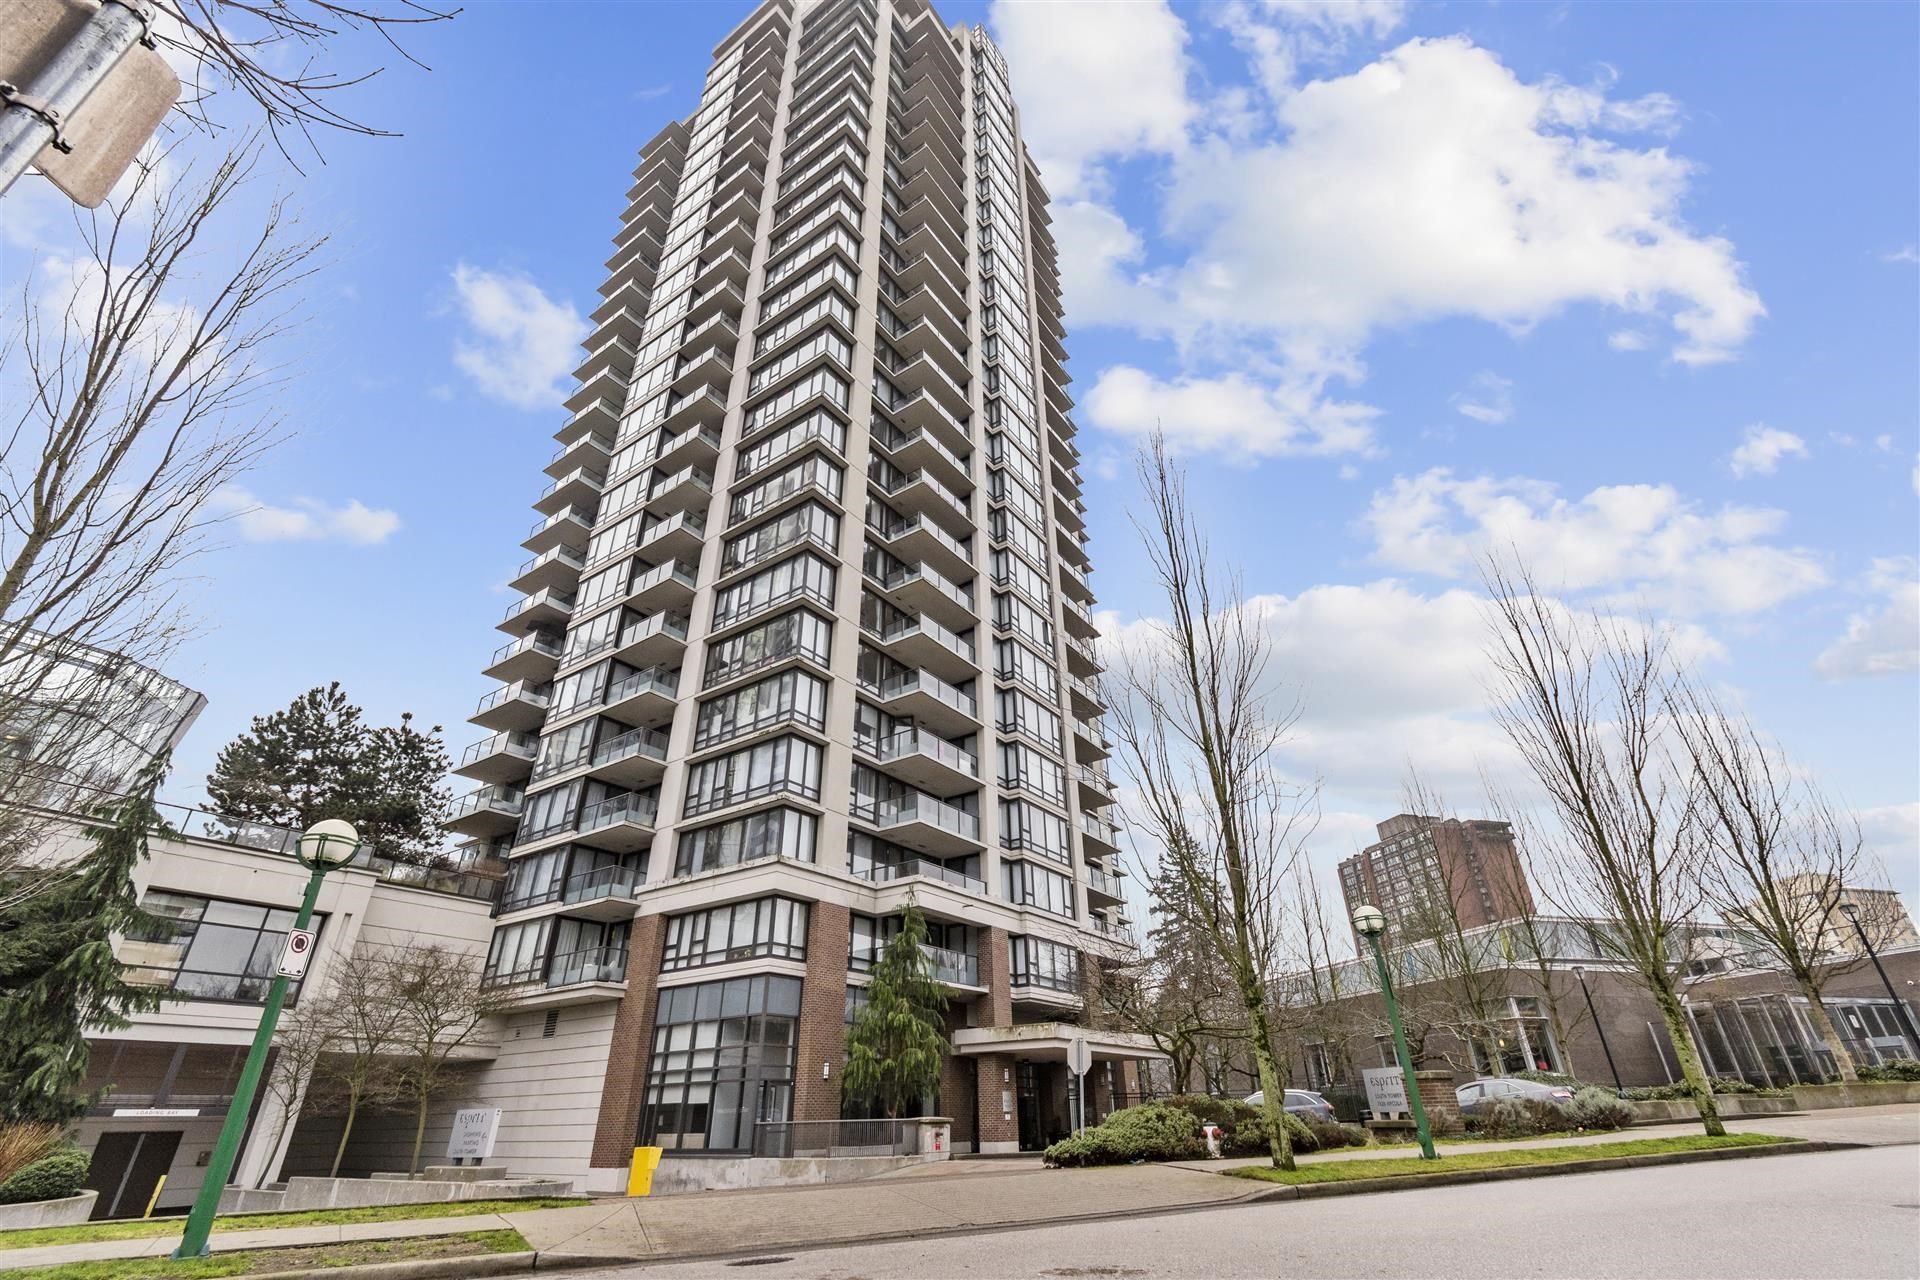 Main Photo: 2406 7328 ARCOLA STREET in Burnaby: Highgate Condo for sale (Burnaby South)  : MLS®# R2644182